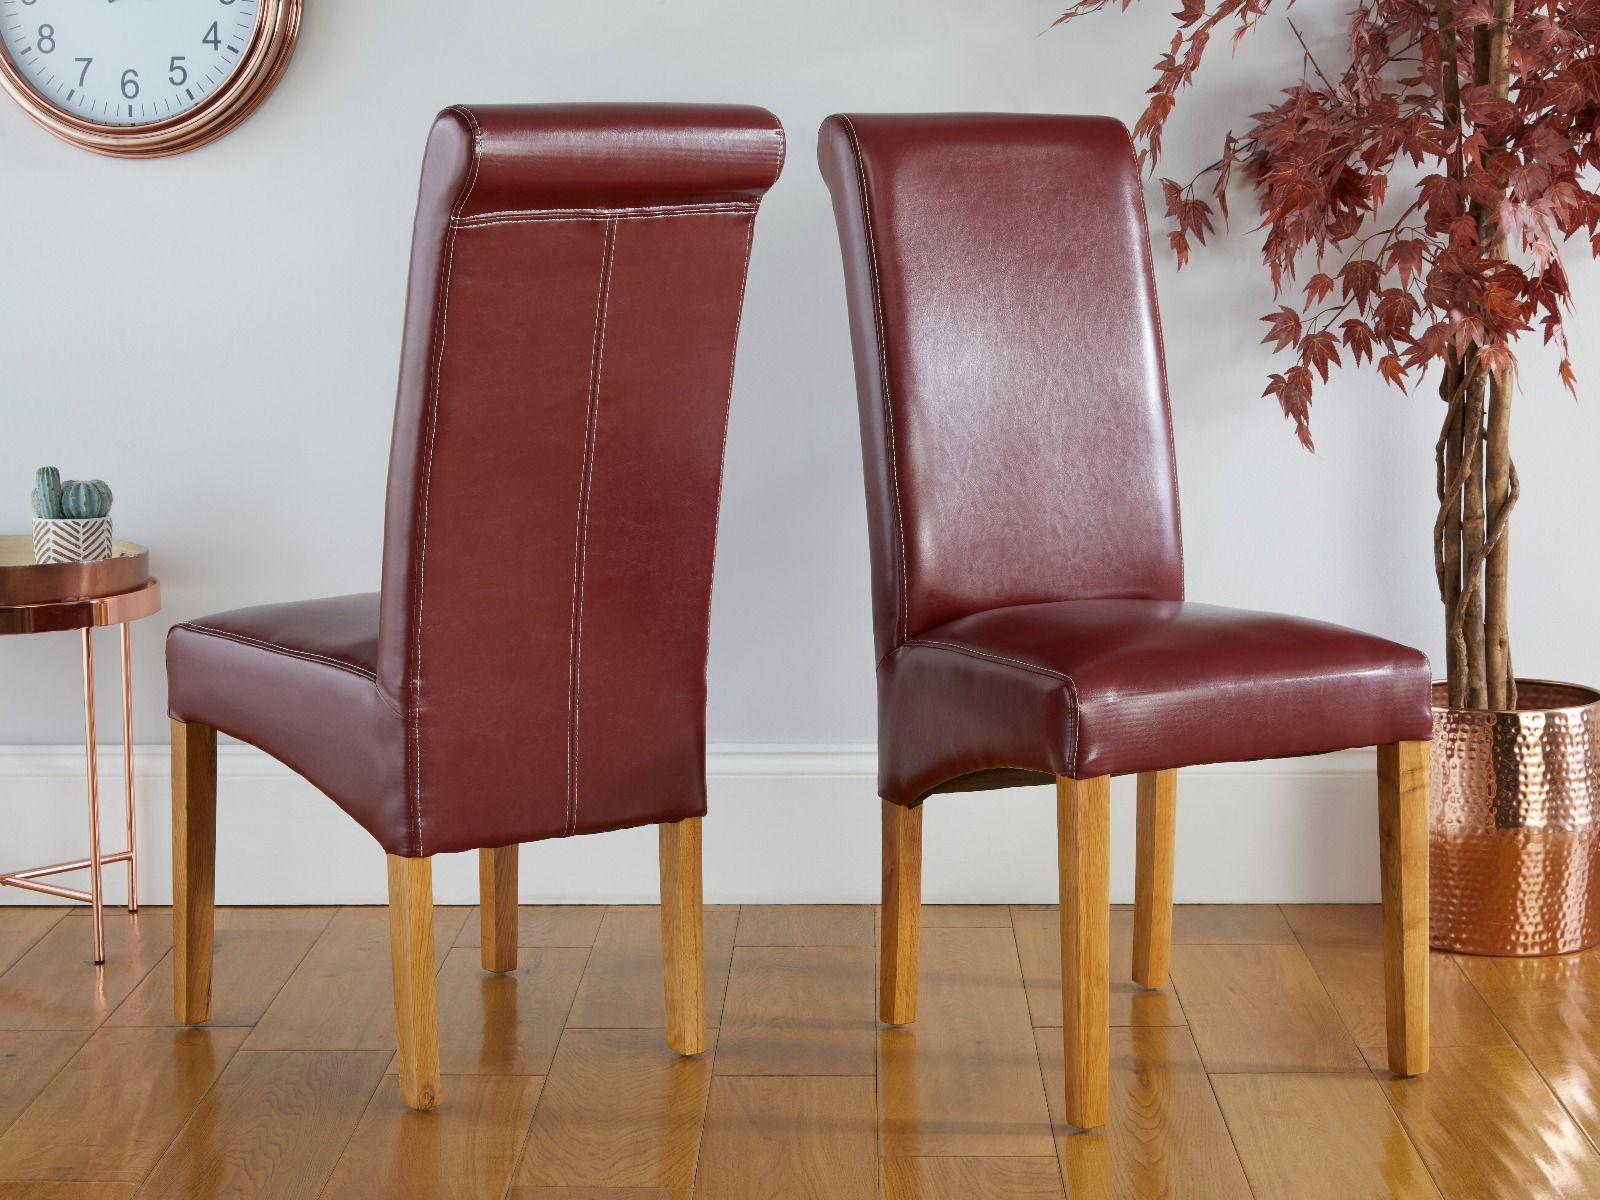 Tuscan Claret Red Leather Scroll Back Dining Chair Oak Legs - WINTER SALE